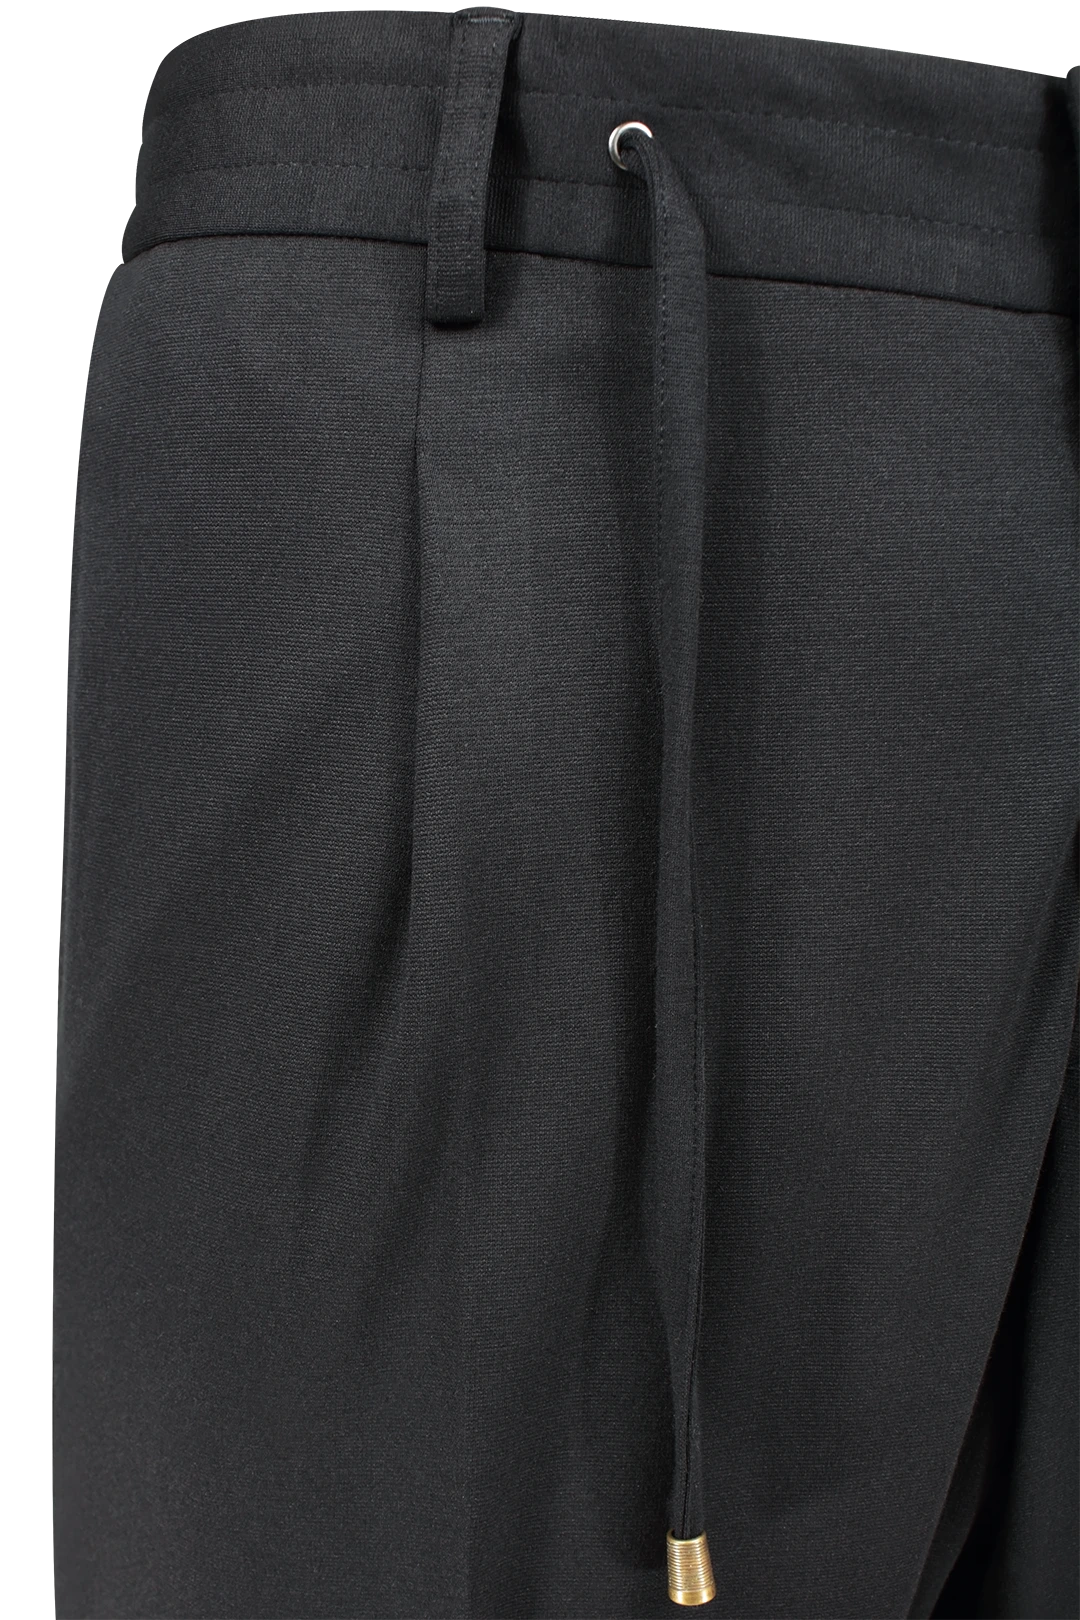 Pantalone con pince e coulisse in jersey nero pince